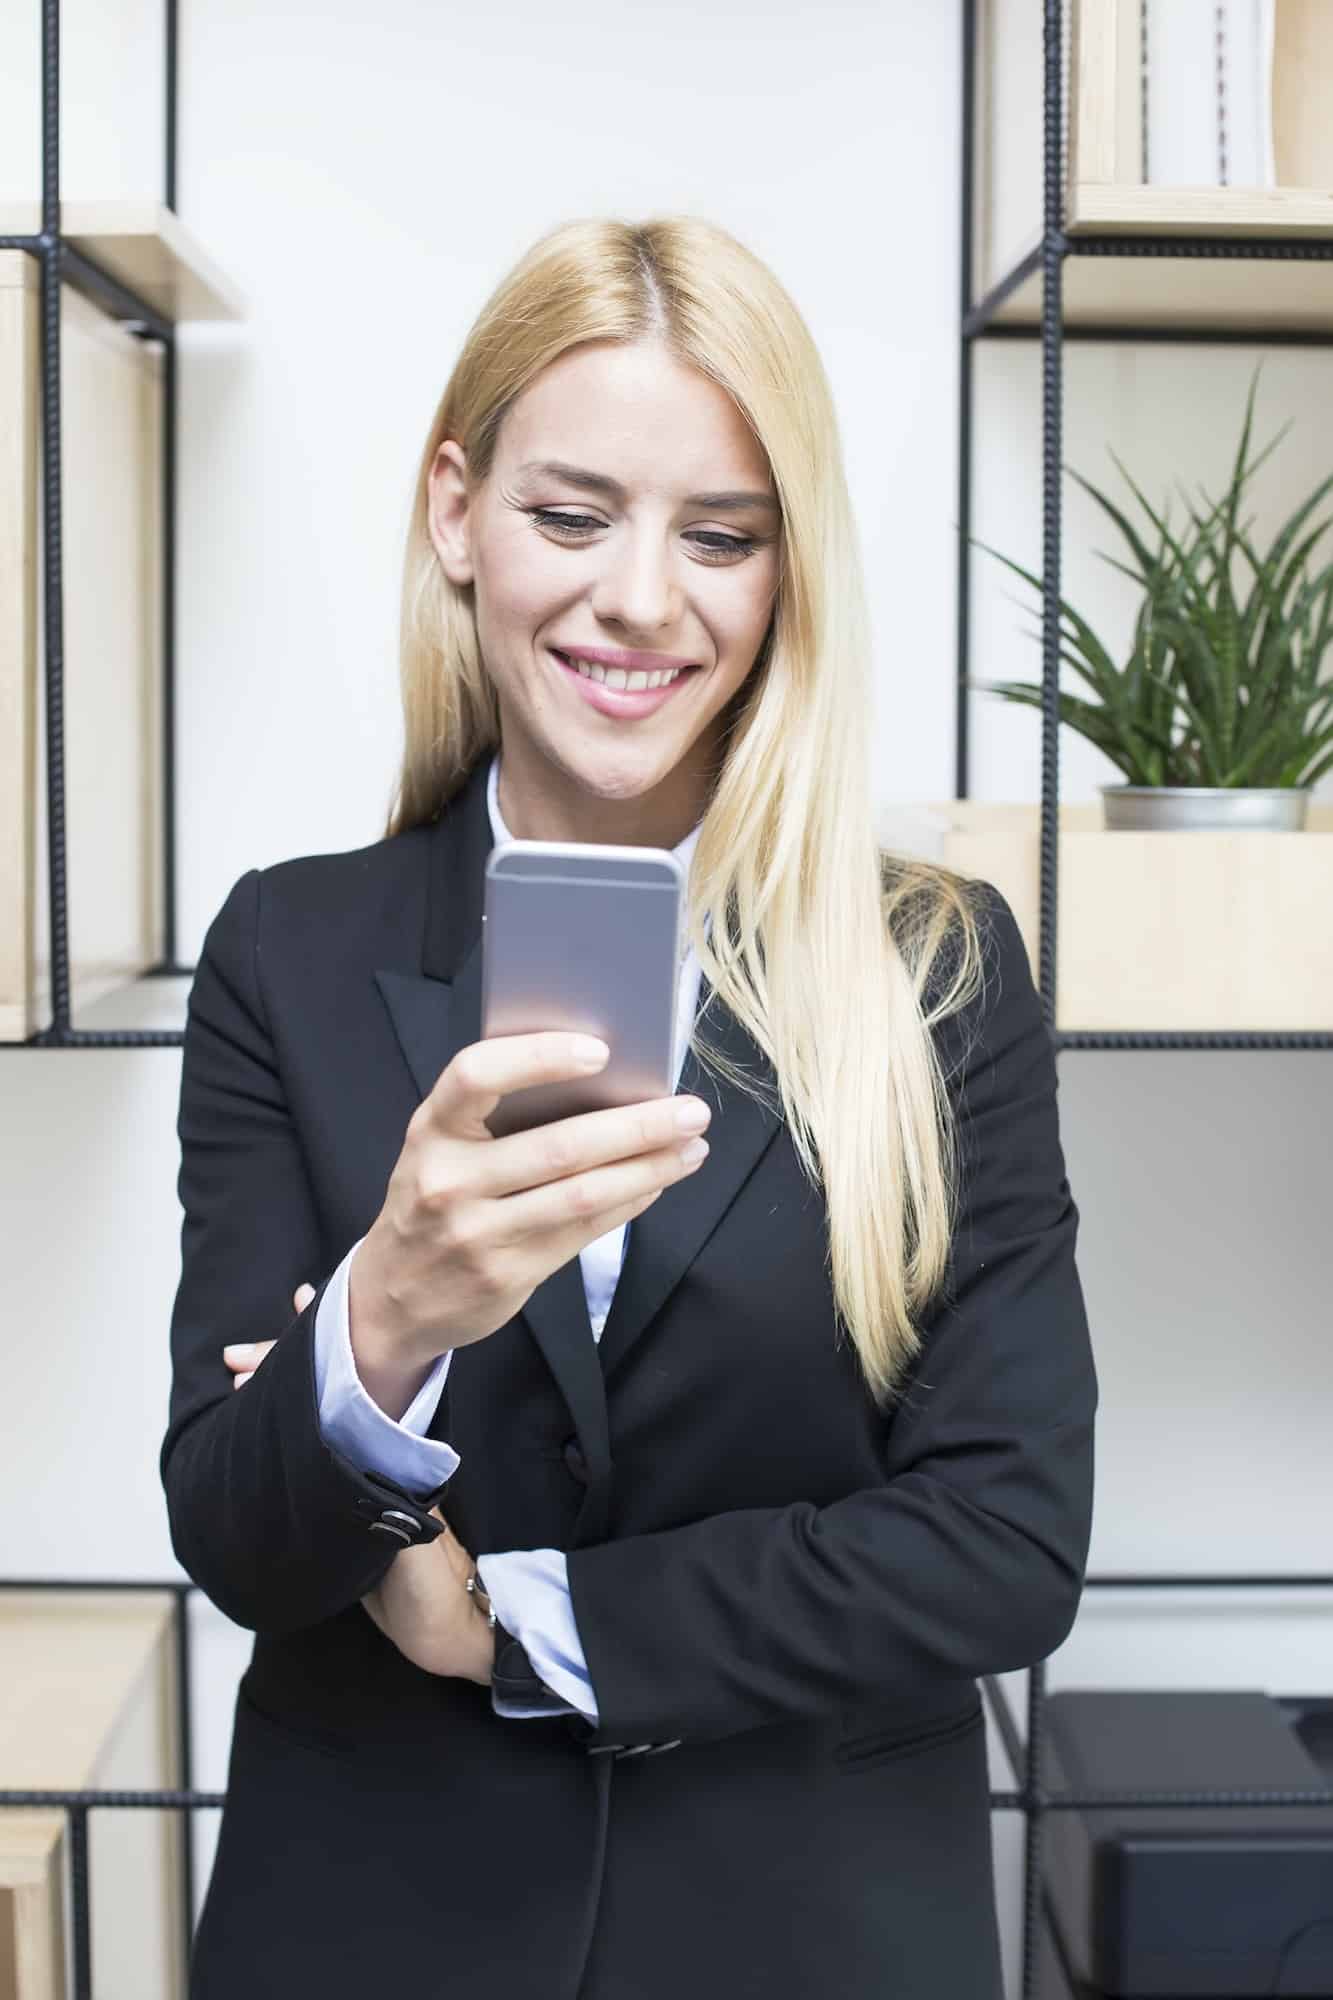 Attractive young businesswoman holding a mobile phone